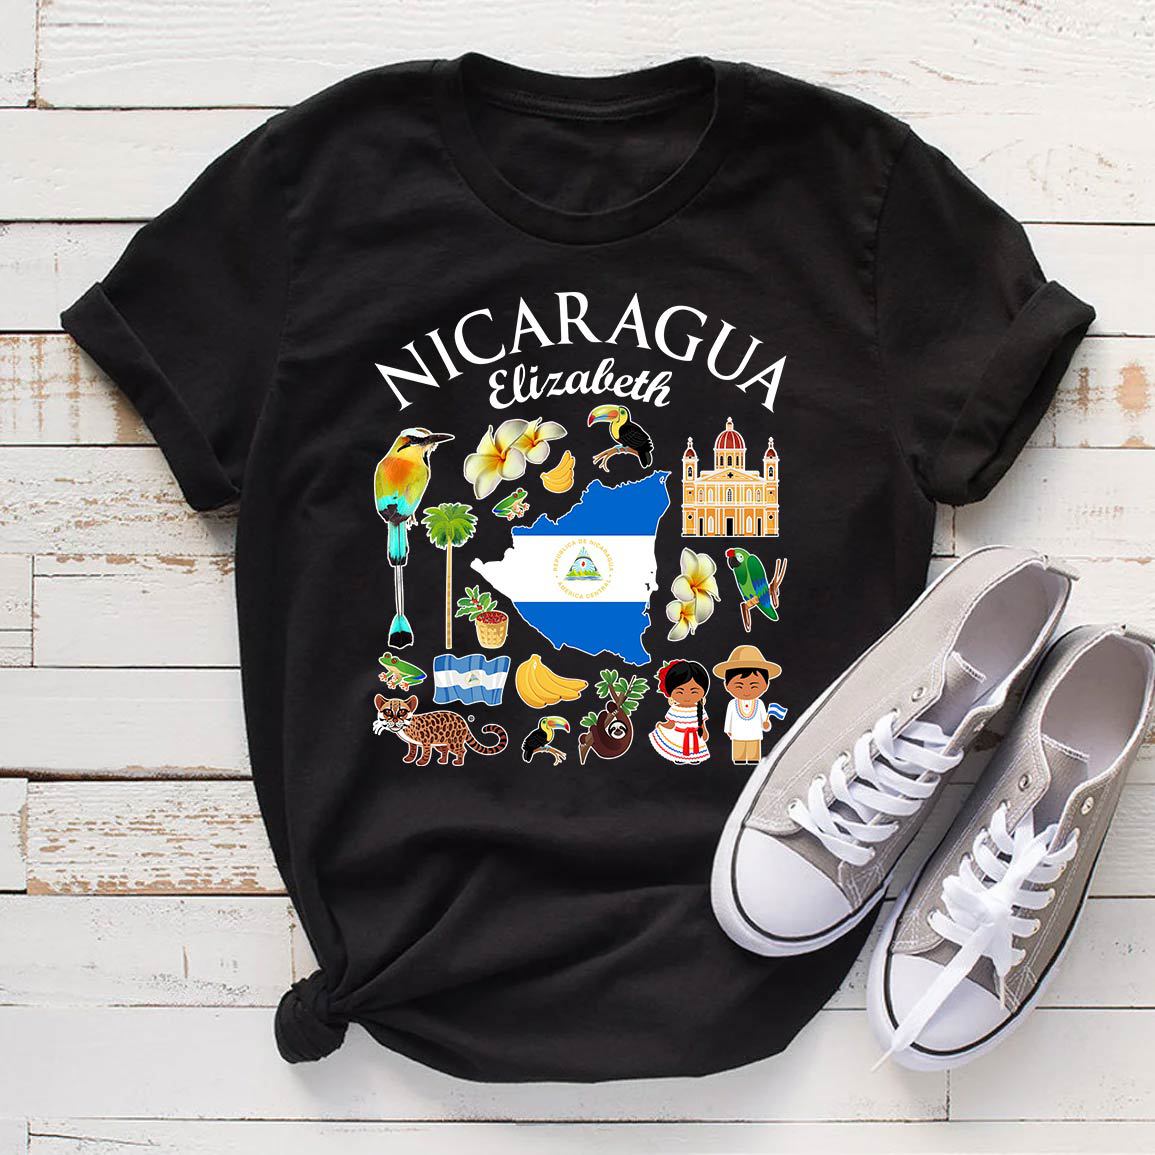 Customized Nicaragua T-shirt With Symbols And Name